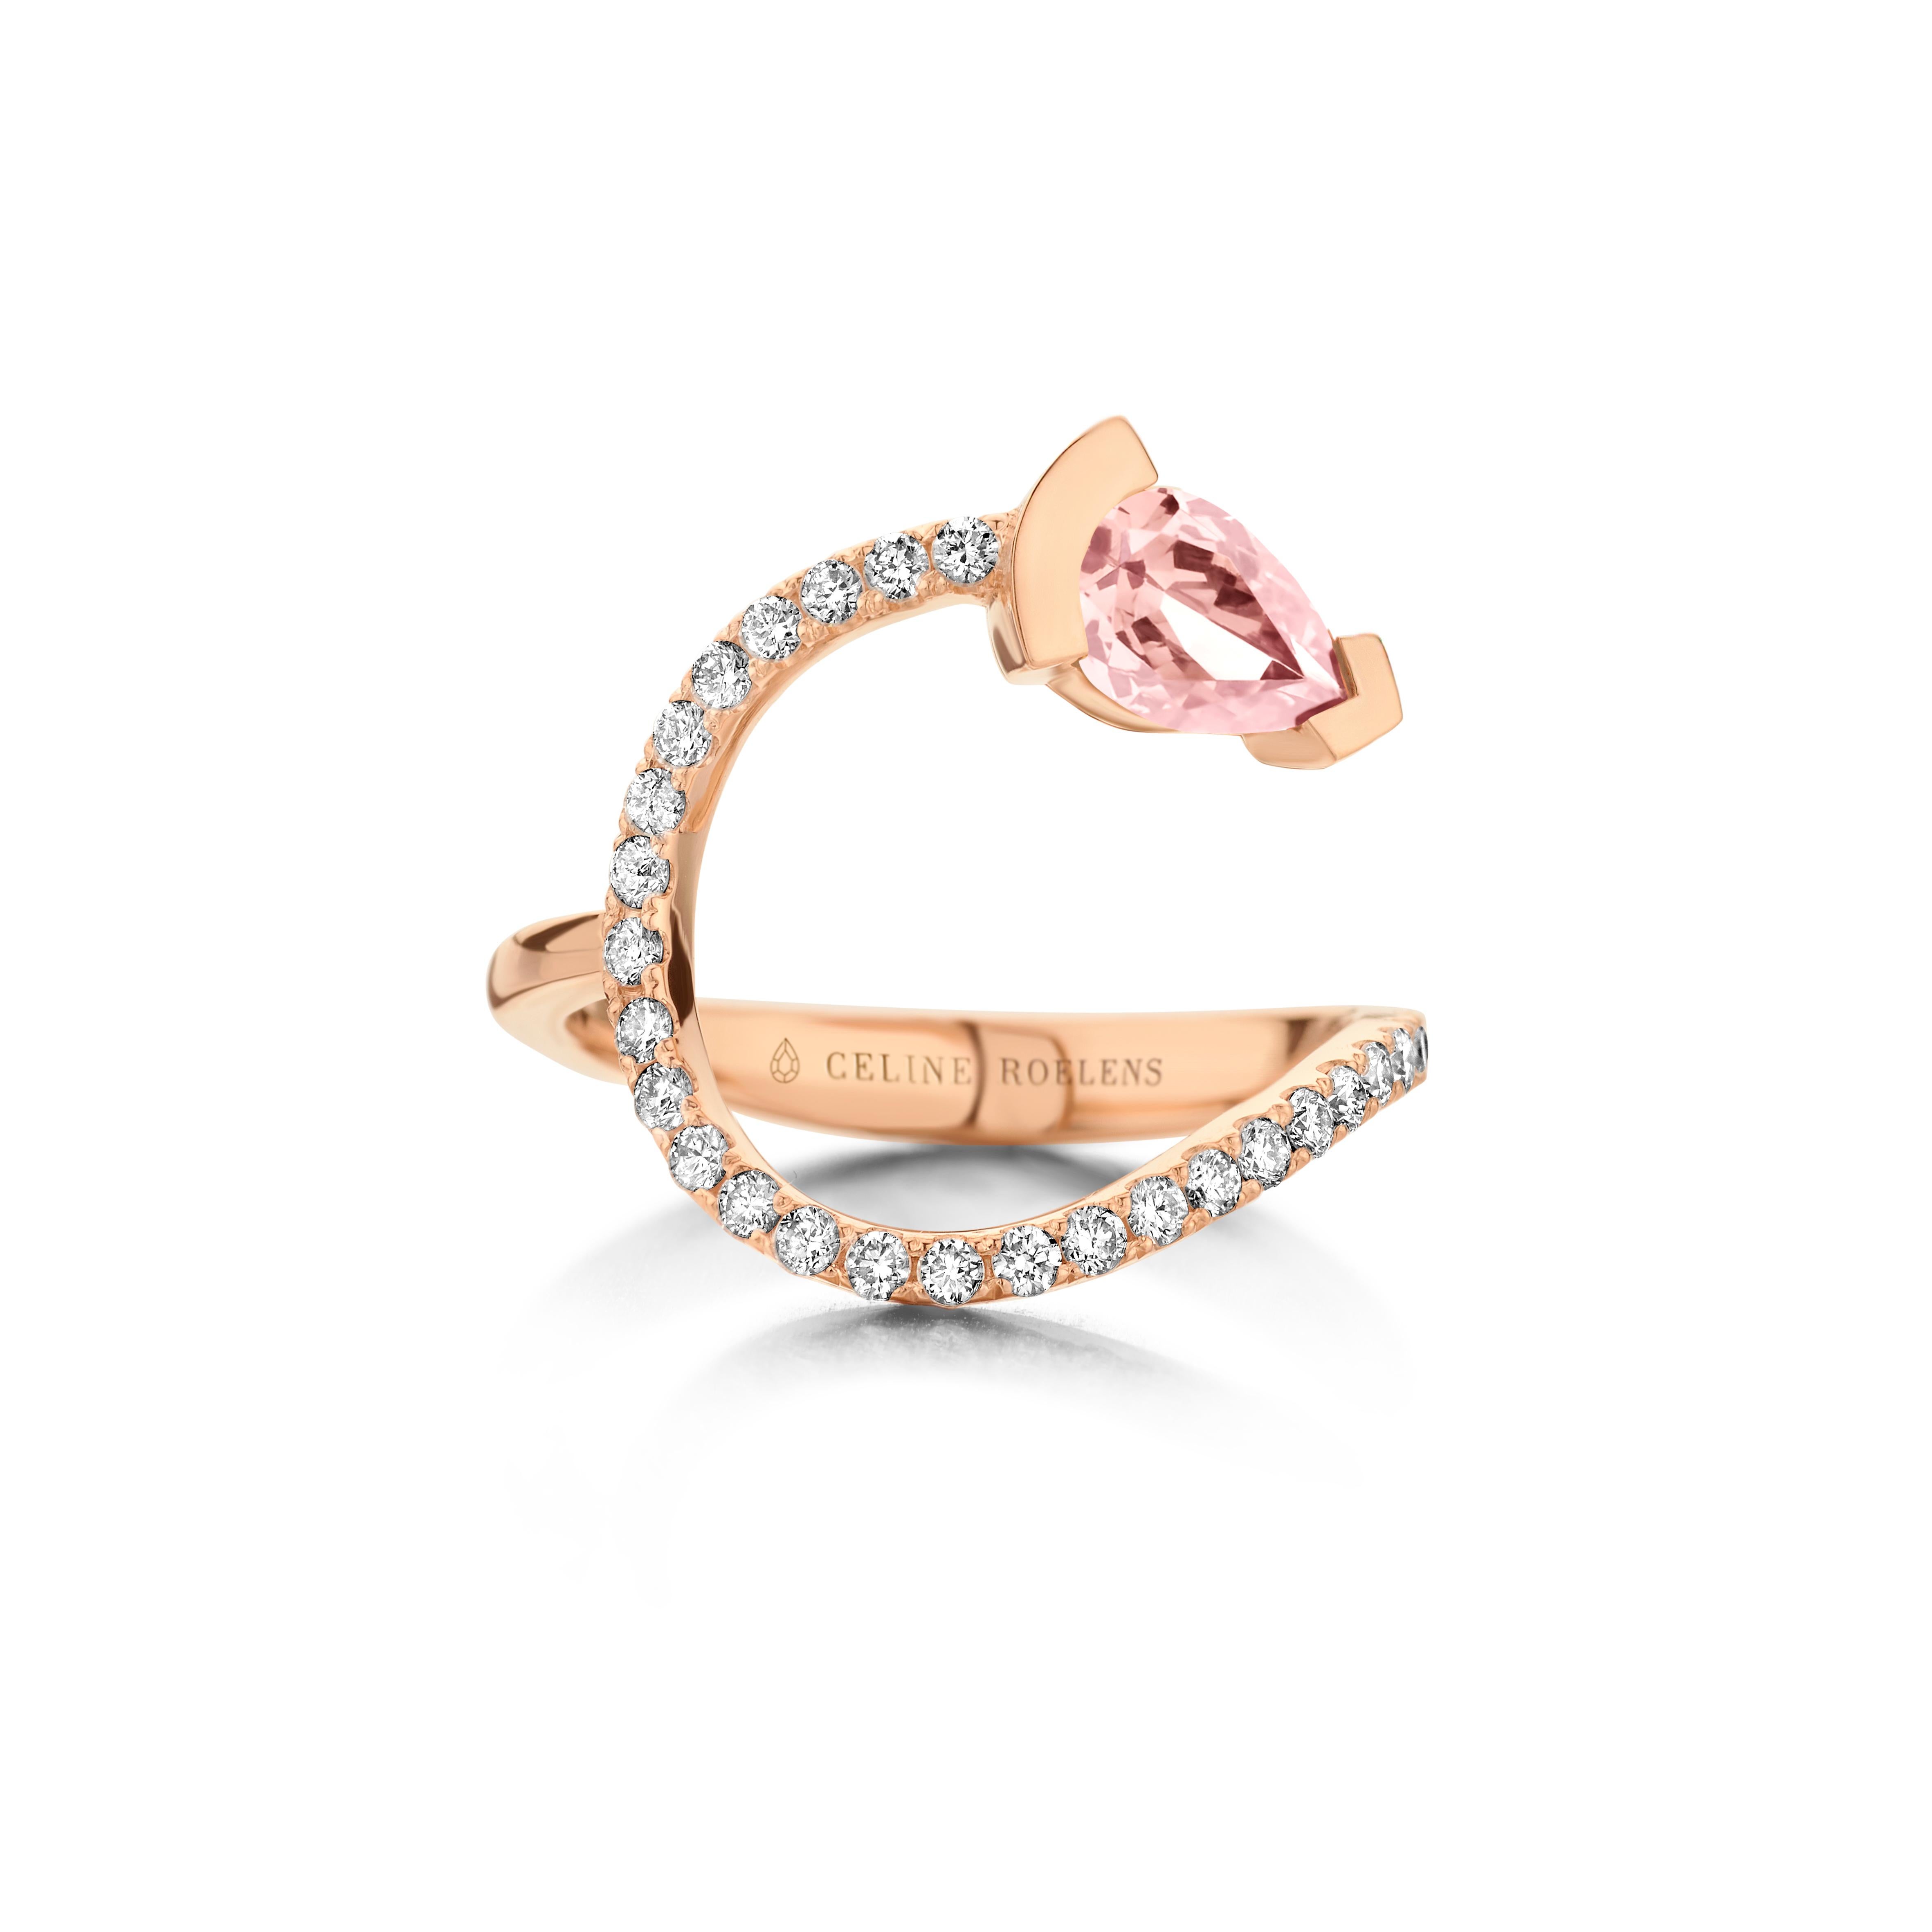 ADELINE curved ring in 18Kt white gold set with a pear shaped Morganite and 0,33 Ct of white brilliant cut diamonds - VS F quality.